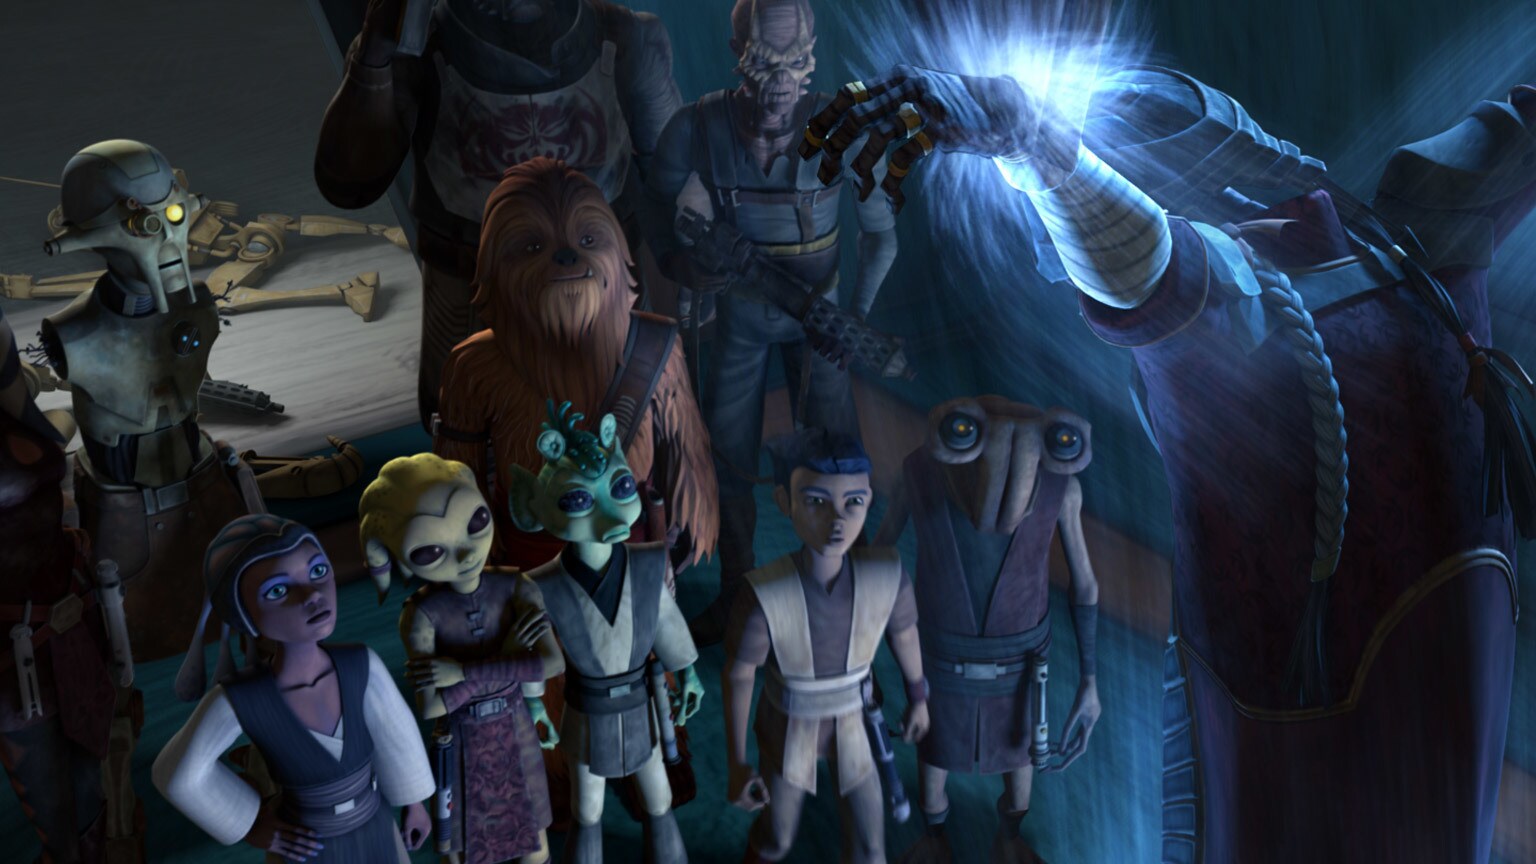 The Clone Wars Rewatch: "A Necessary Bond" With the Enemy